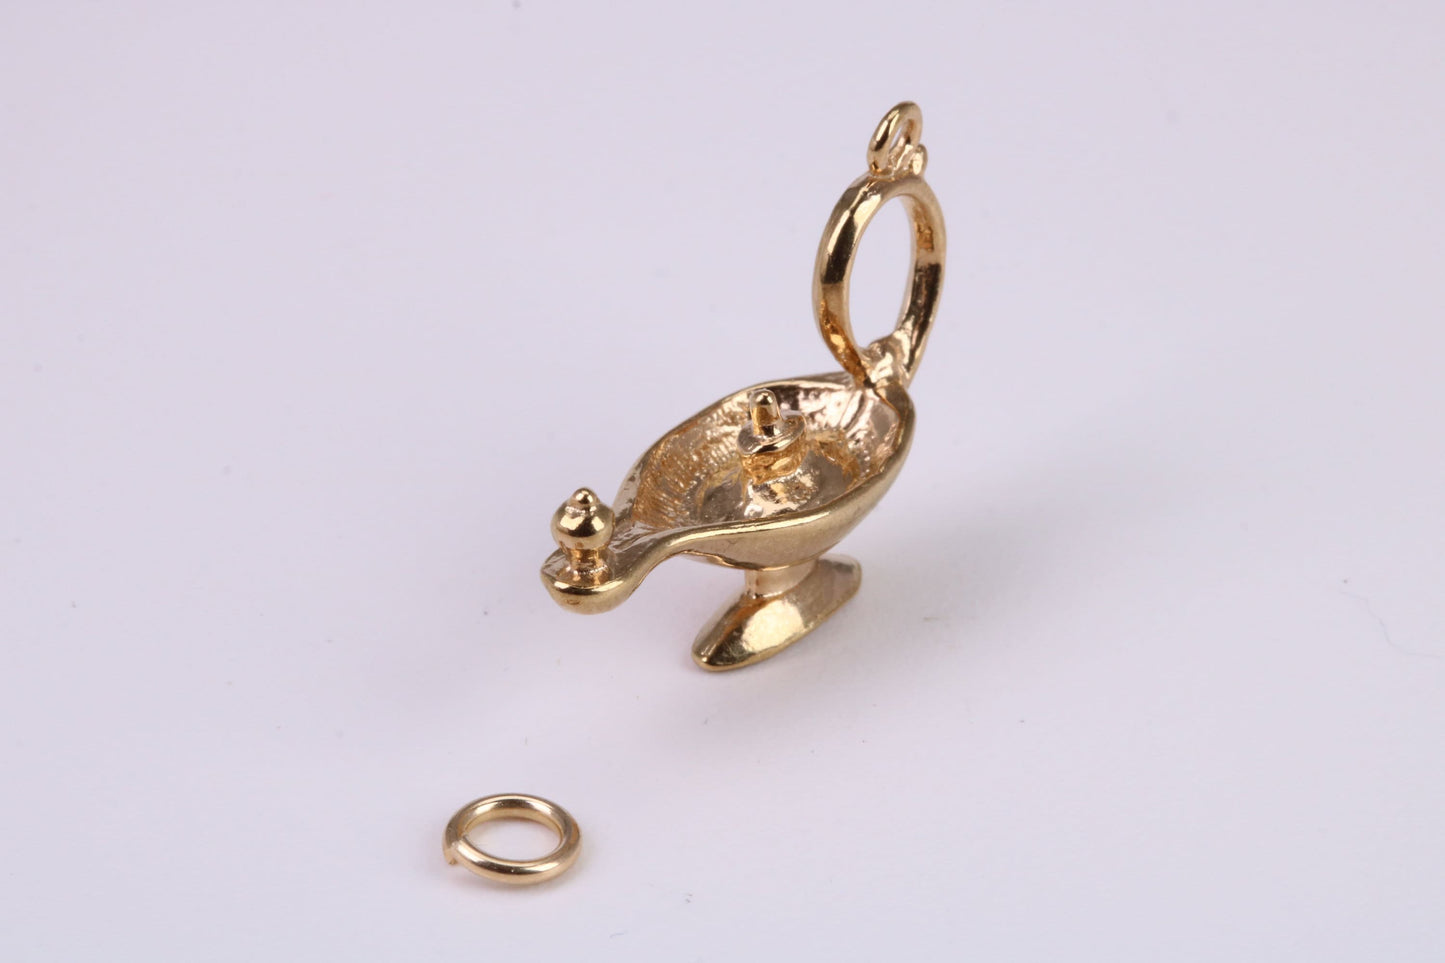 Magic Genie Lamp Charm, Traditional Charm, Made From Solid Yellow Gold with British Hallmark, Complete with Attachment Link